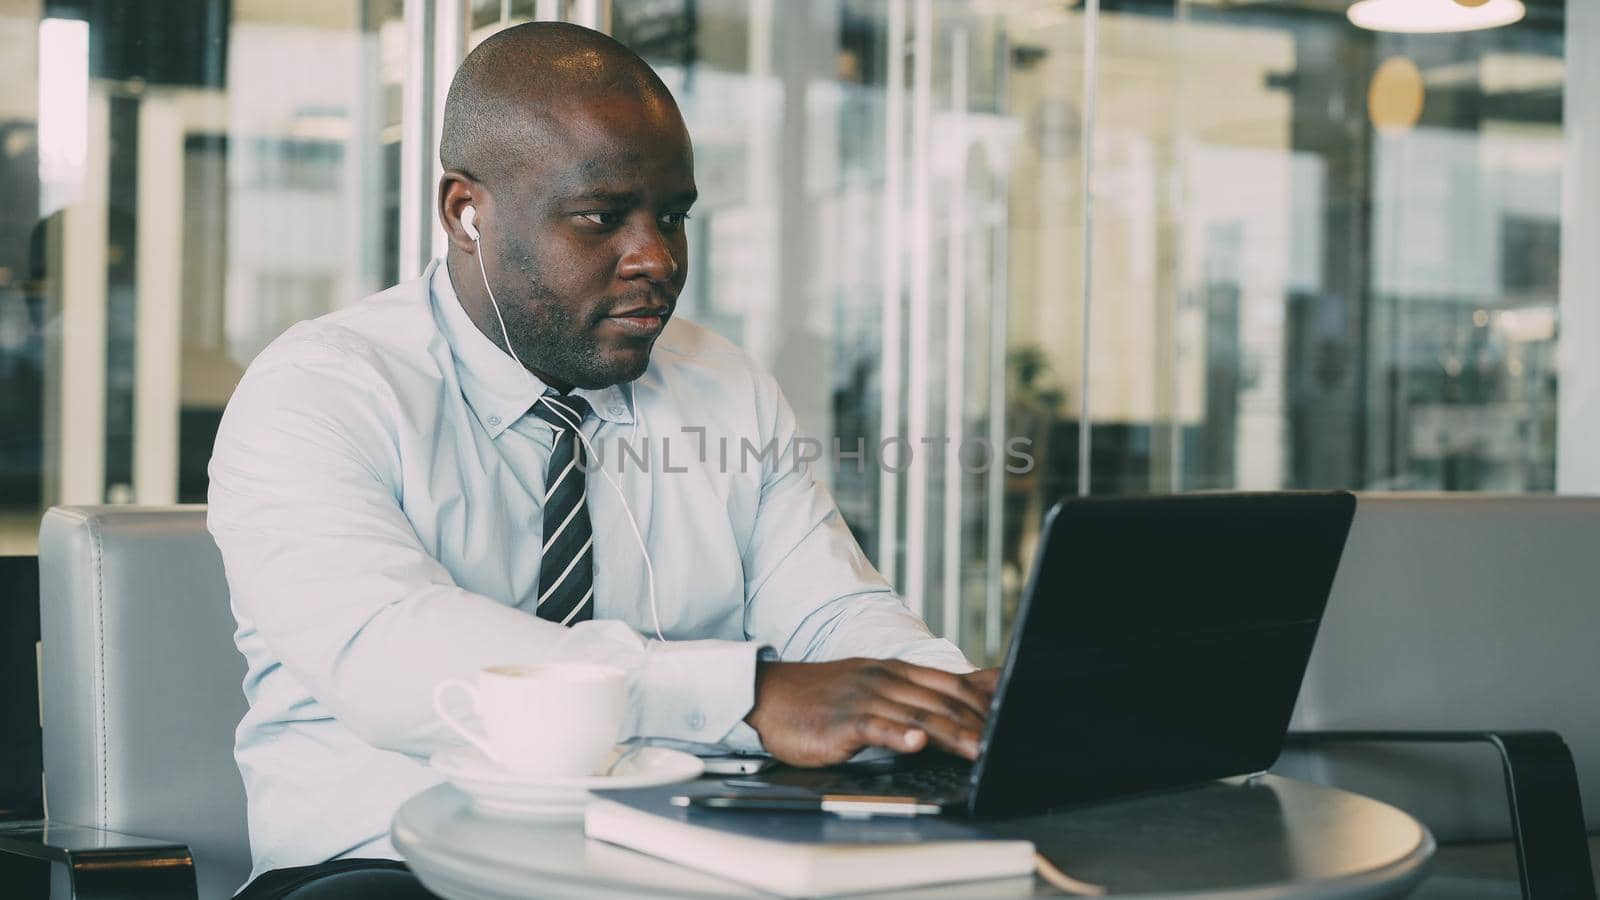 African American businessman in formal wear working and surfing social media on laptop while listening to music with earbuds in his ears in a glassy cafe by silverkblack